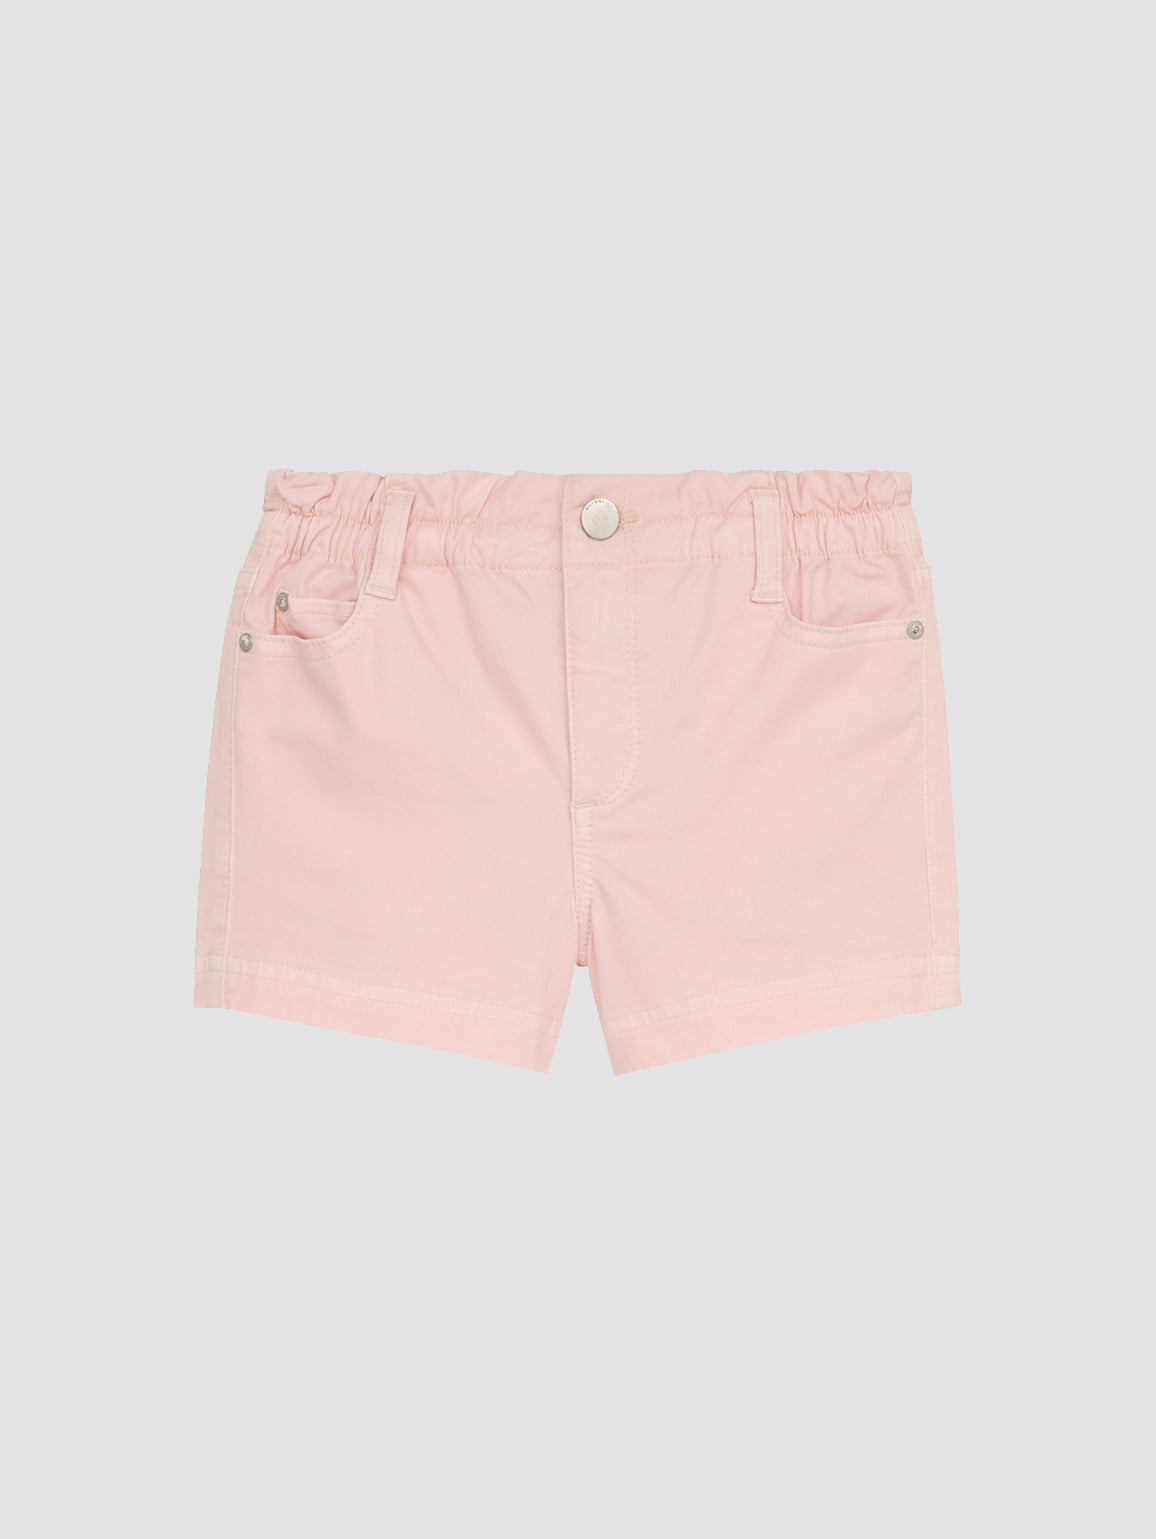 Lucy Jean Short | Pink Peony